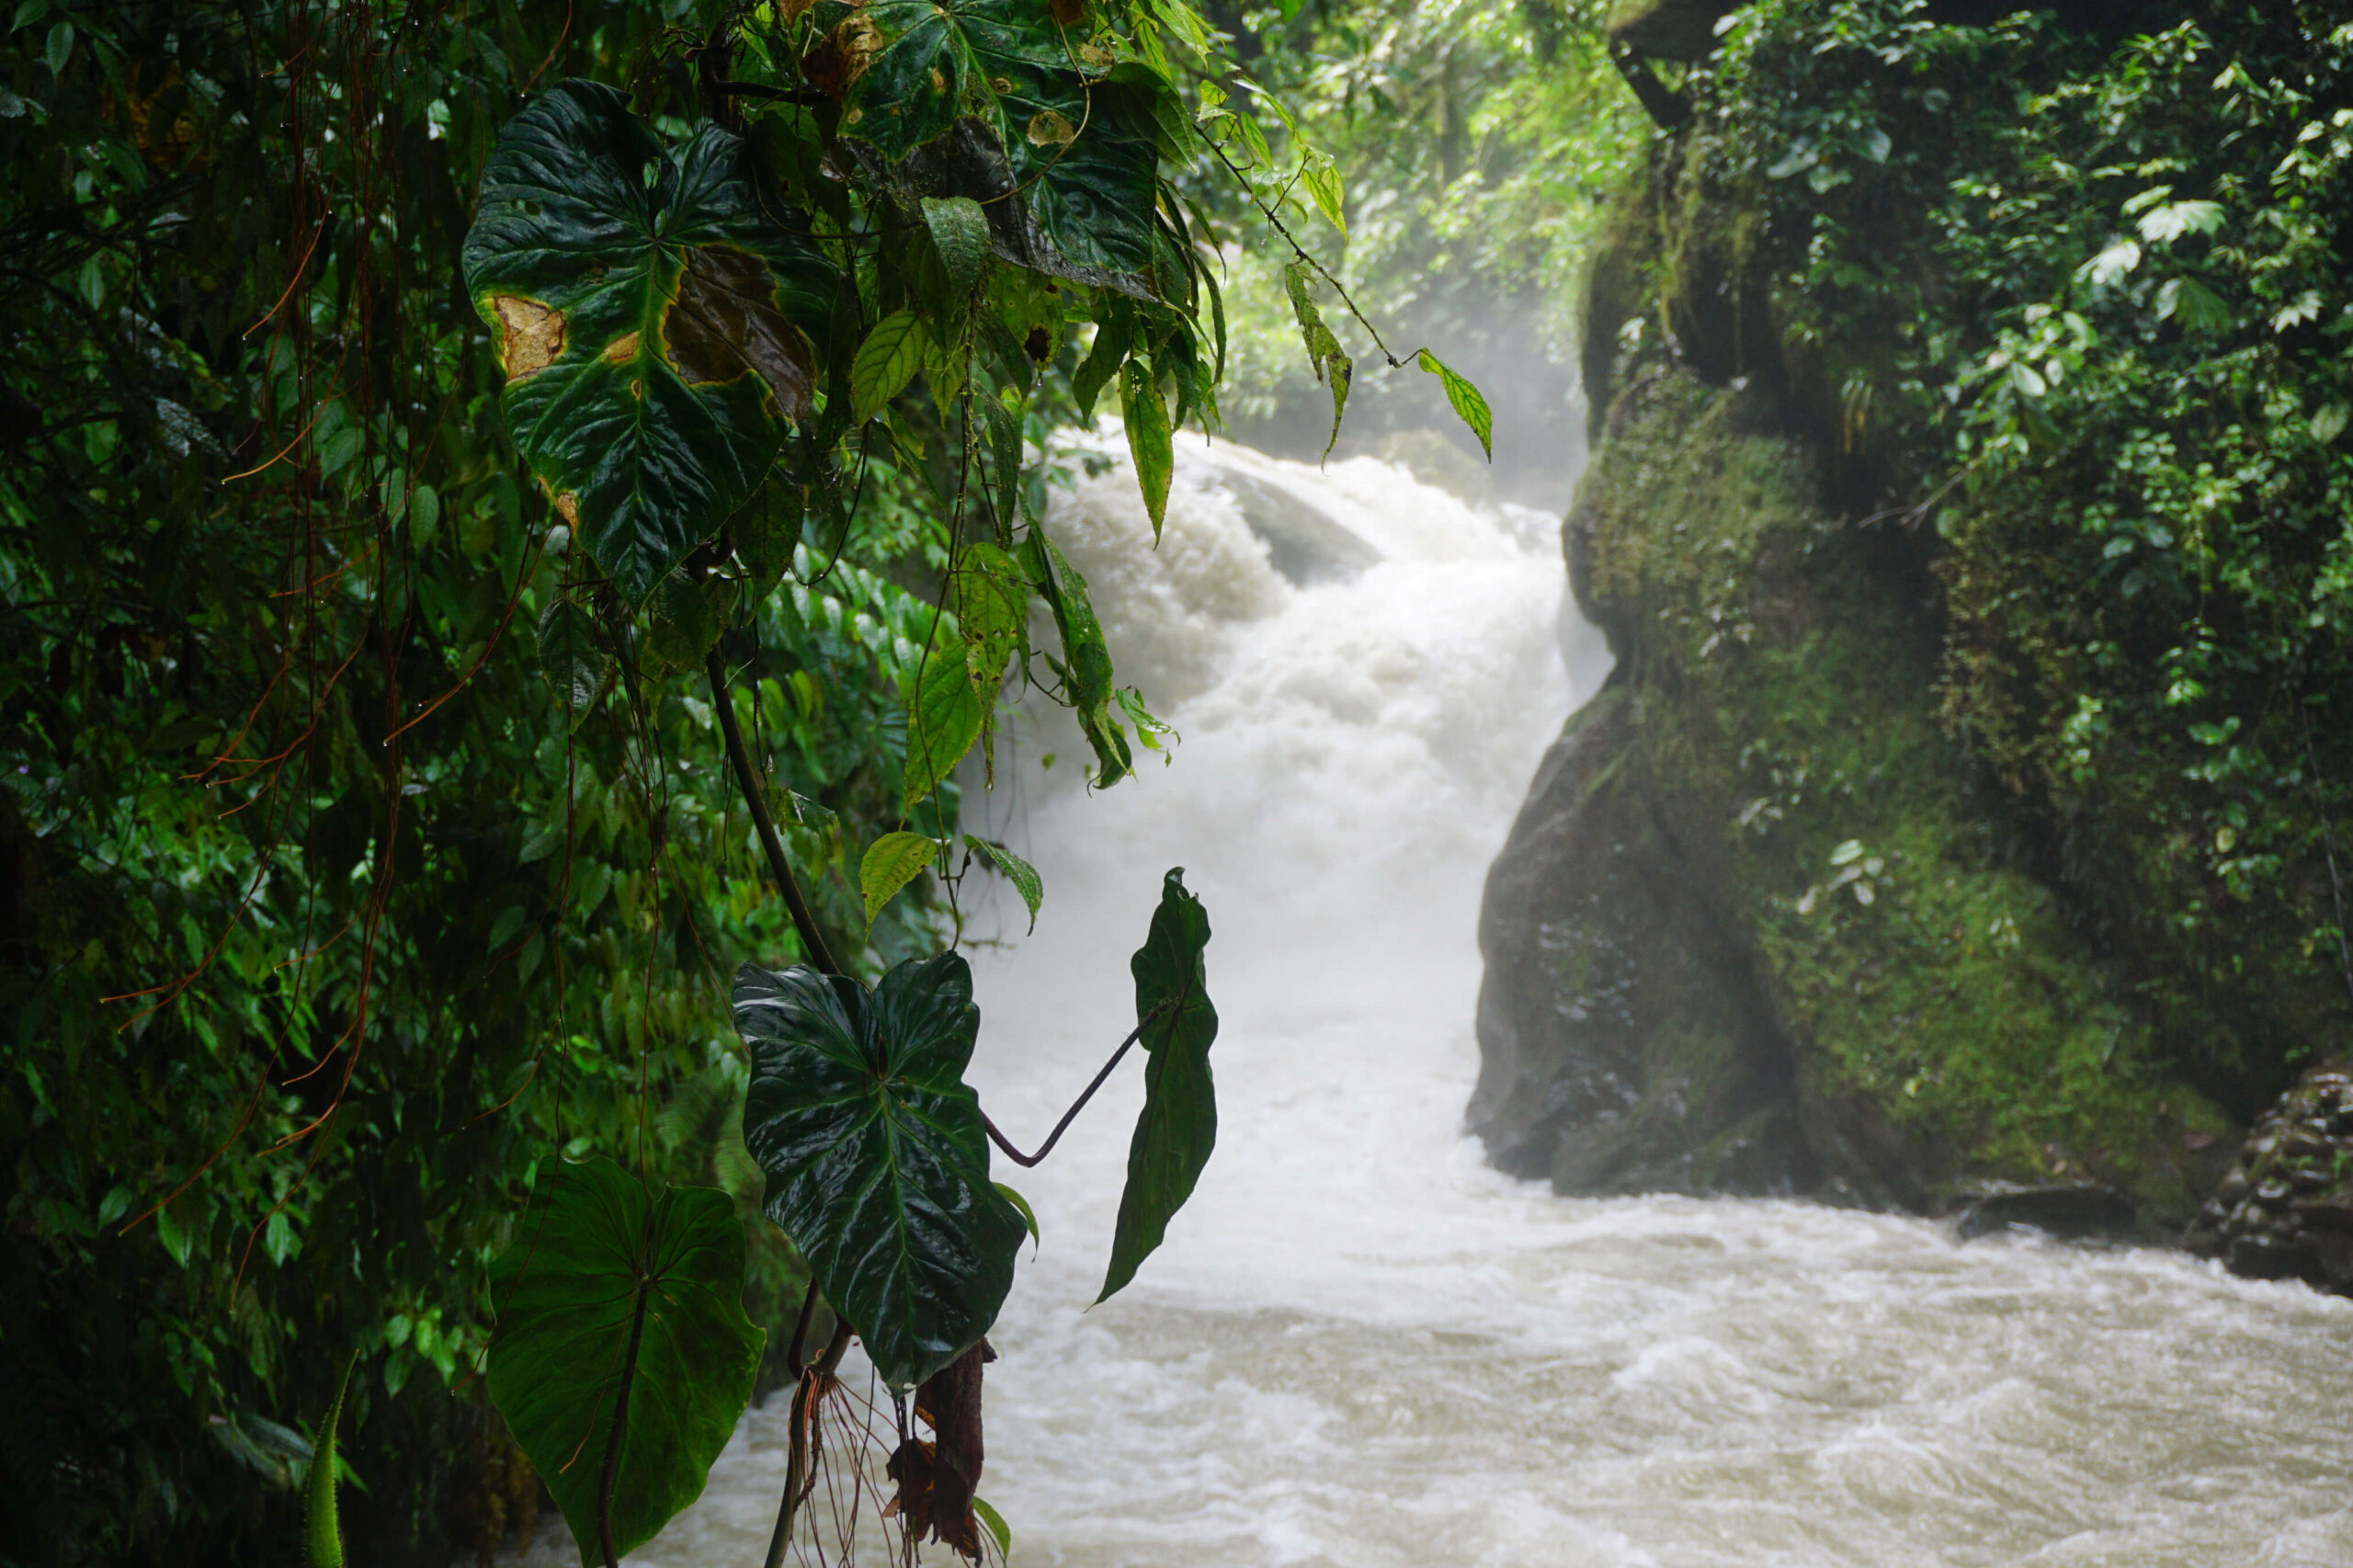 Waterfall flowing through a canyon in Mindo Cloudforest.